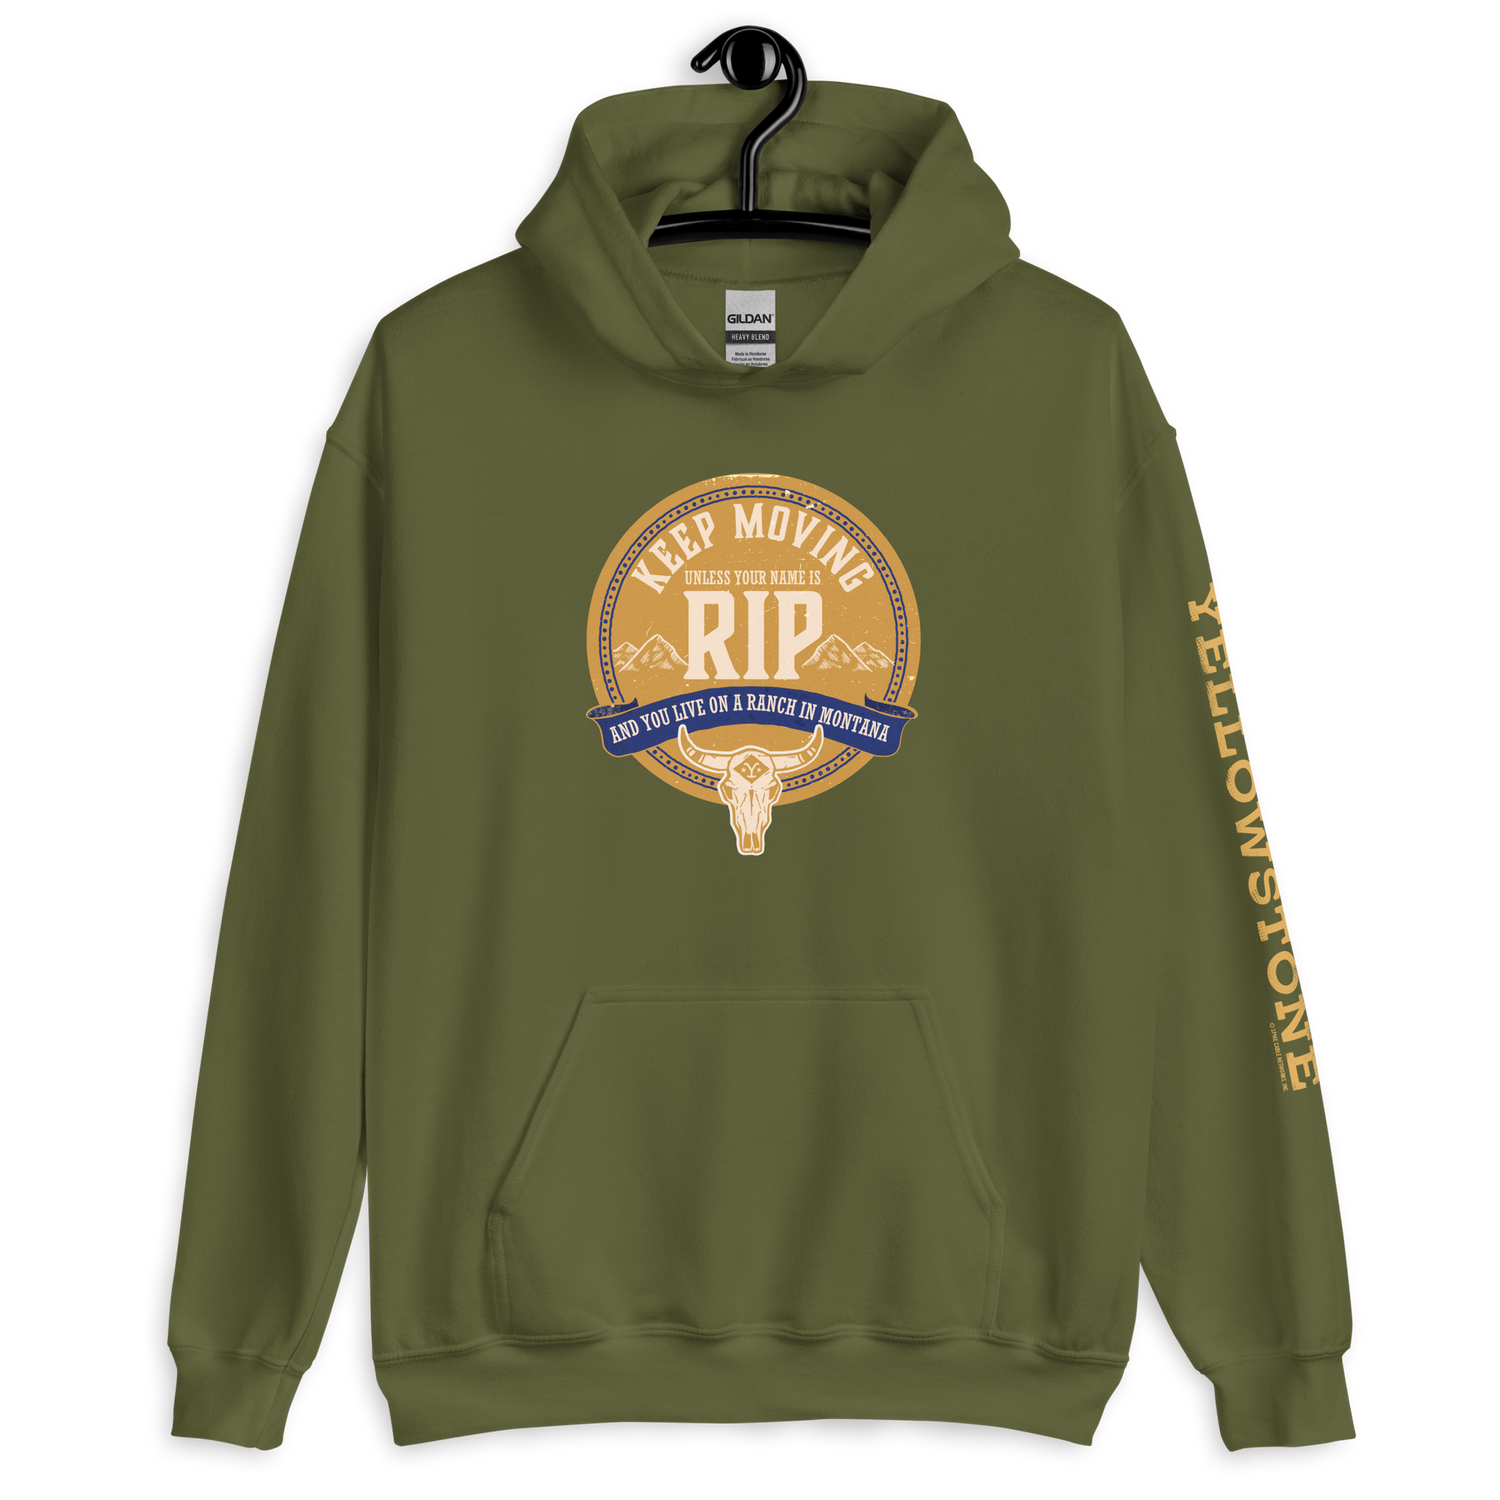 Yellowstone Keep Moving Unless You Are RIP Hooded Sweatshirt